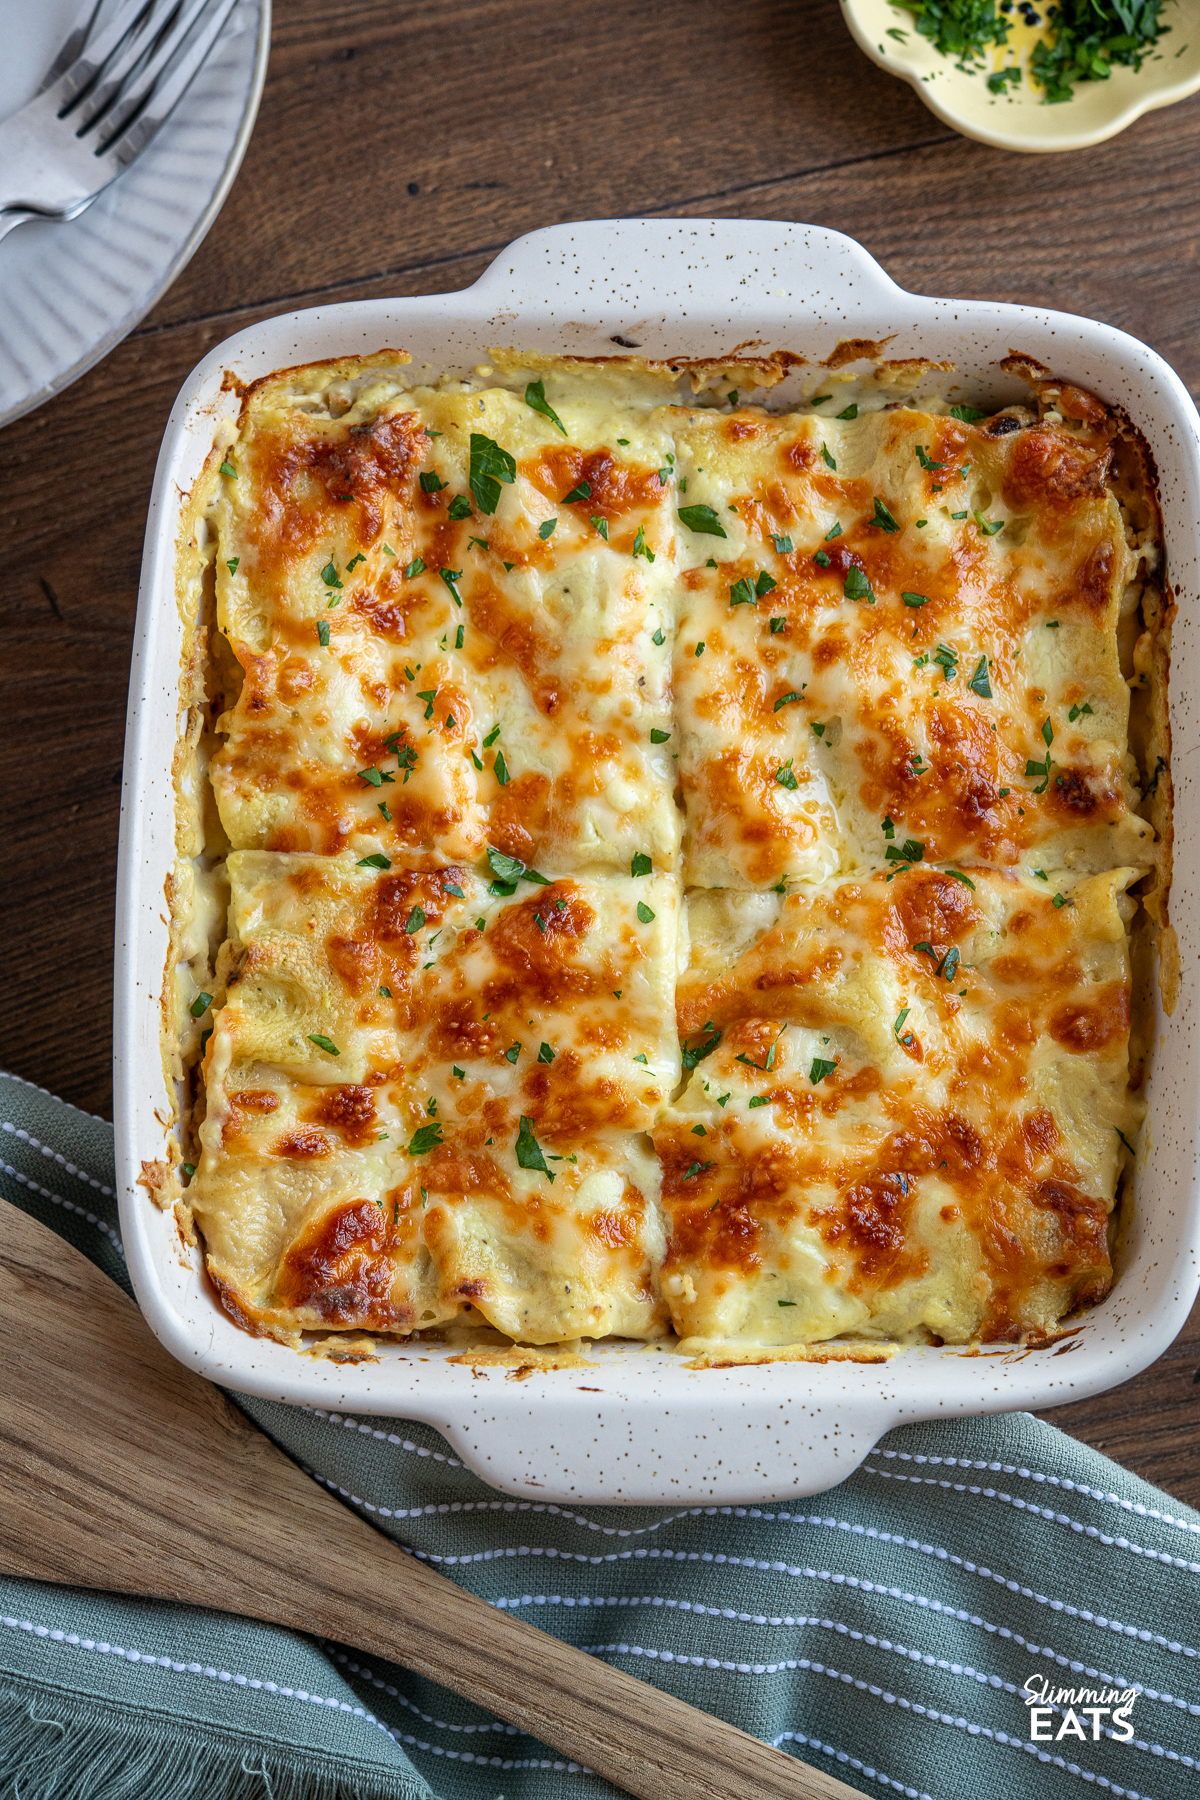 Roasted cauliflower lasagne in a white baking dish with a wooden spatula to the side, accompanied by a plate and a small bowl of herbs in the background, with a green/gray kitchen towel in front.